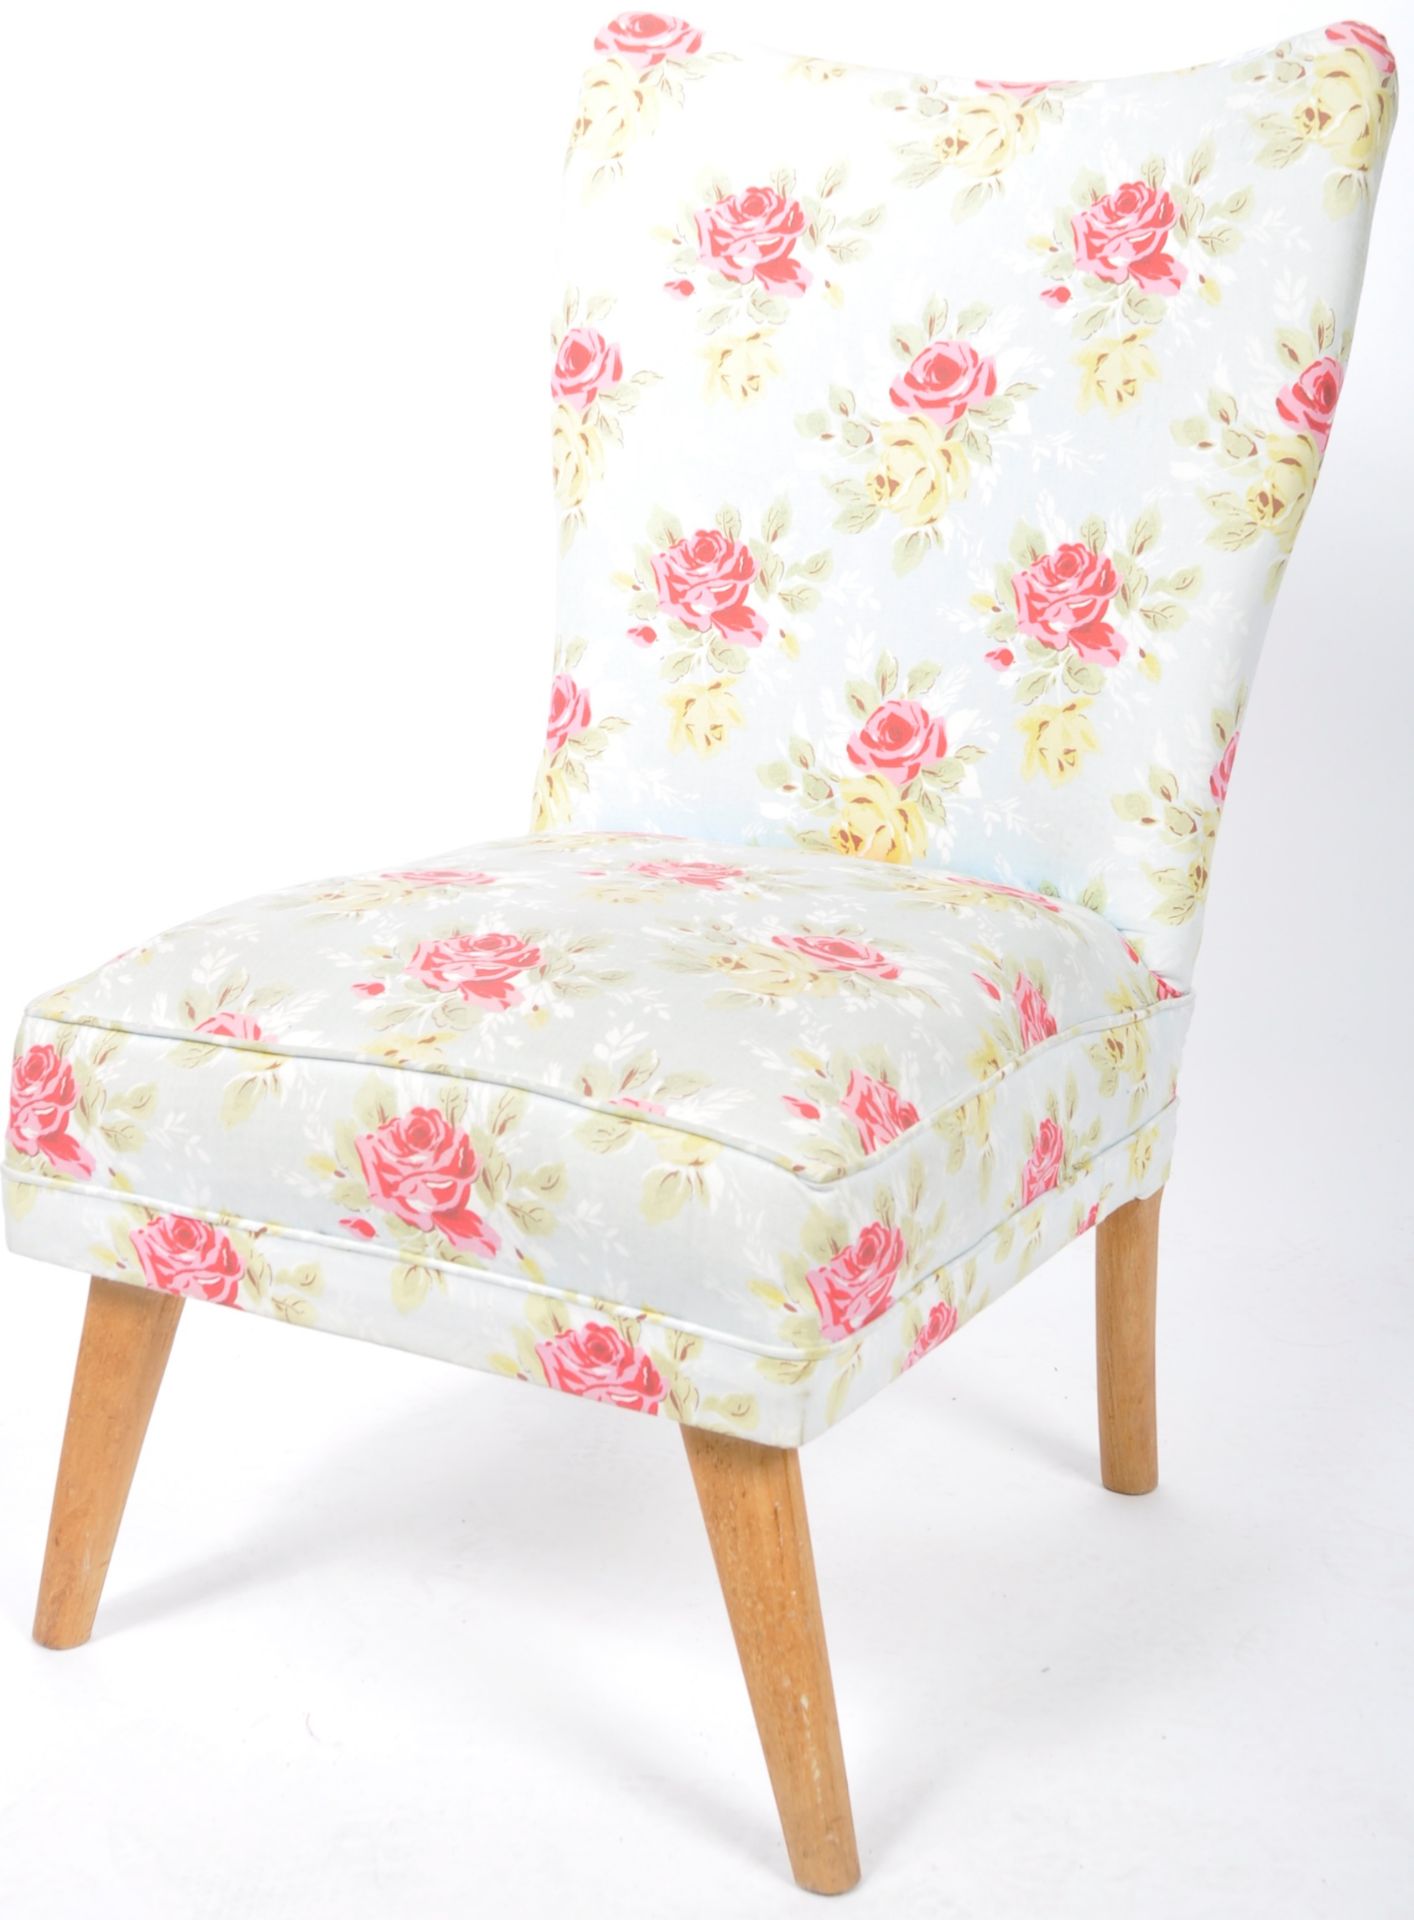 RETRO HOWARD KEITH MANNER LOW COCKTAIL CHAIR IN CATH KIDSTON UPHOLSTERY - Image 4 of 7